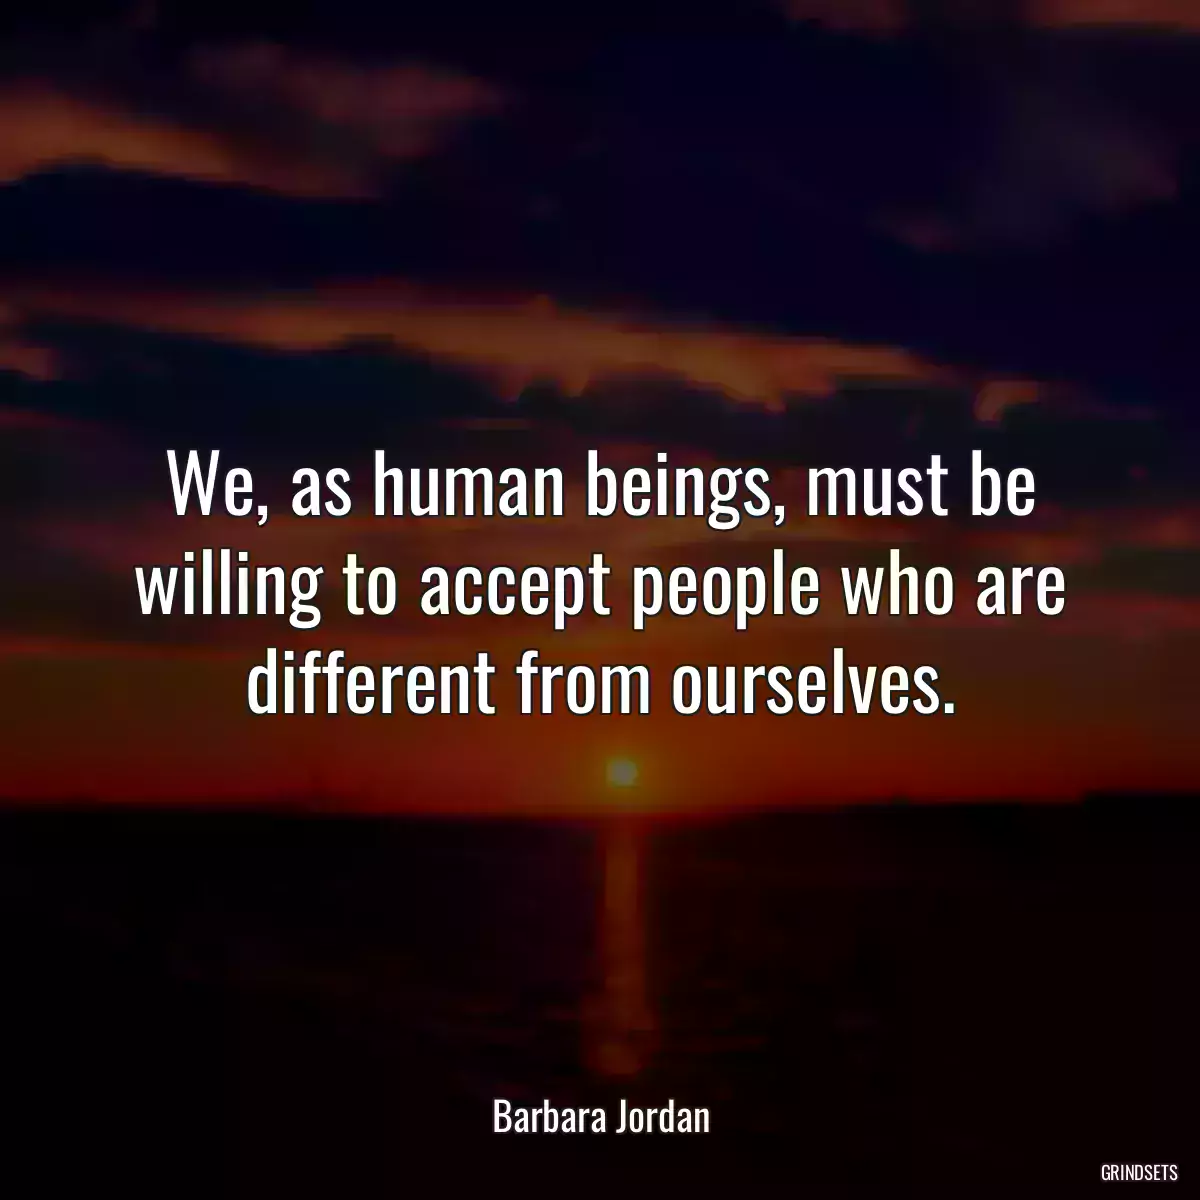 We, as human beings, must be willing to accept people who are different from ourselves.